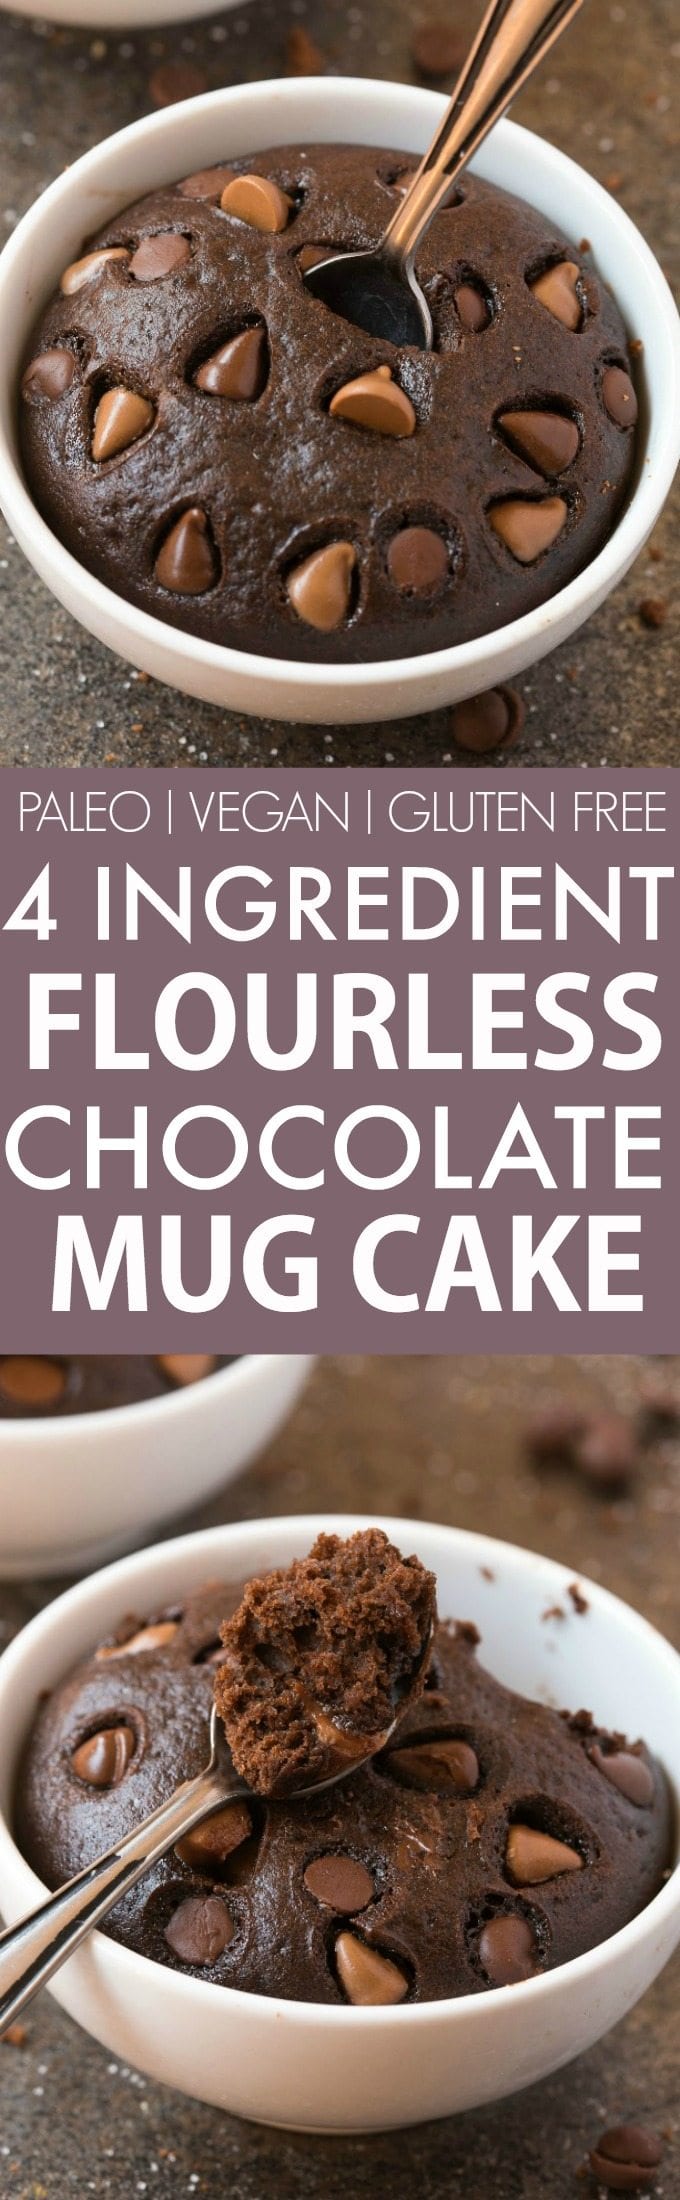 4 Ingredient Flourless Chocolate Mug Cake (V, GF, Paleo)- Ready in just ONE minute, this HEALTHY 4-ingredient chocolate cake is moist, gooey, naturally sweetened and has NO butter, oil, flour, grains or sugar, but you'd never tell- Oven option too! {vegan, gluten free, paleo recipe}- thebigmansworld.com